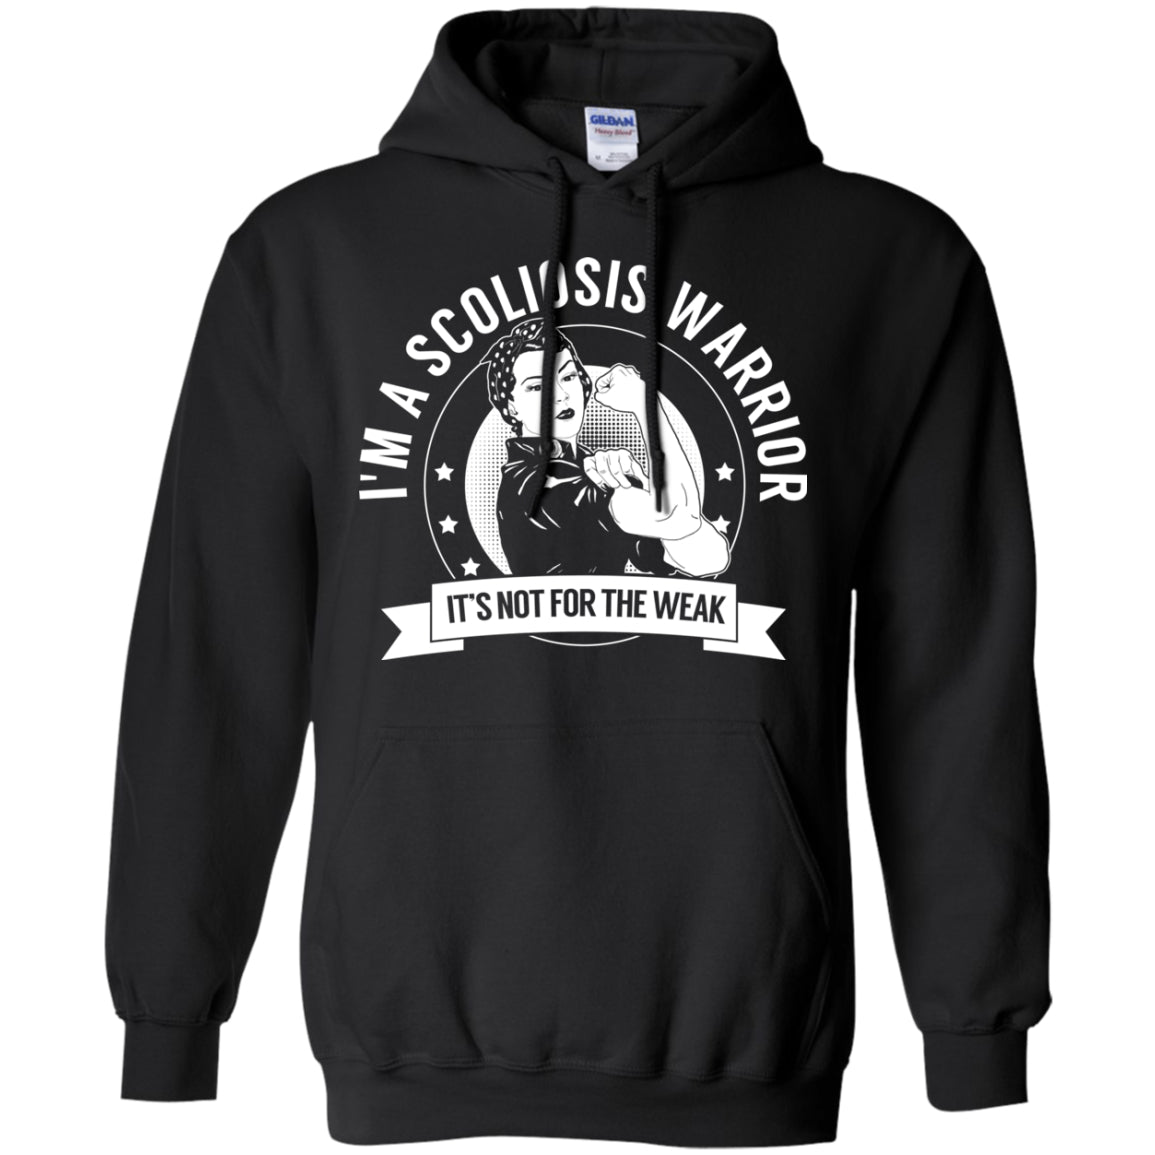 Scoliosis Warrior Not For The Weak Pullover Hoodie 8 oz. - The Unchargeables